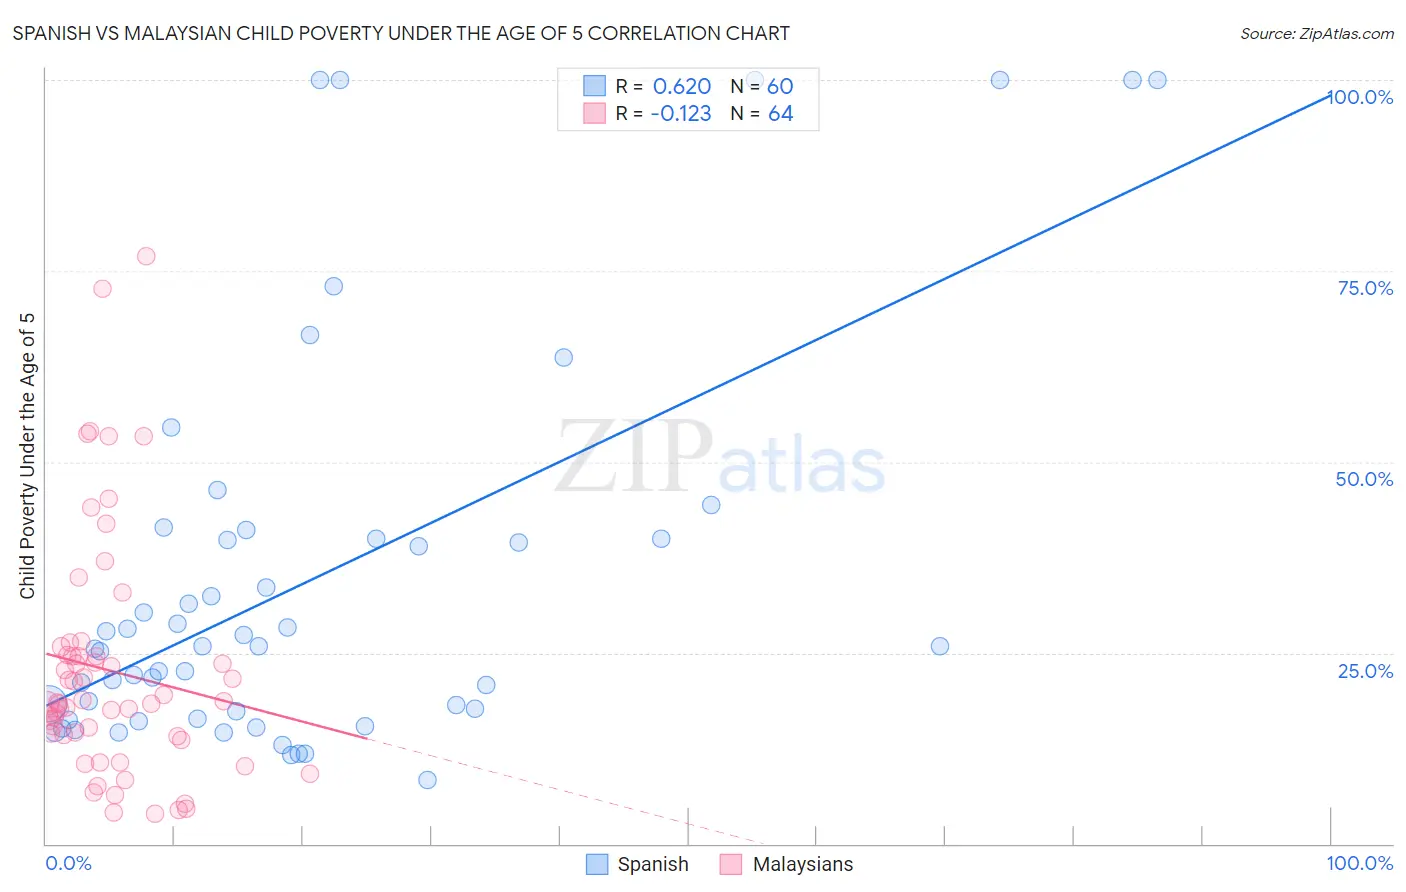 Spanish vs Malaysian Child Poverty Under the Age of 5